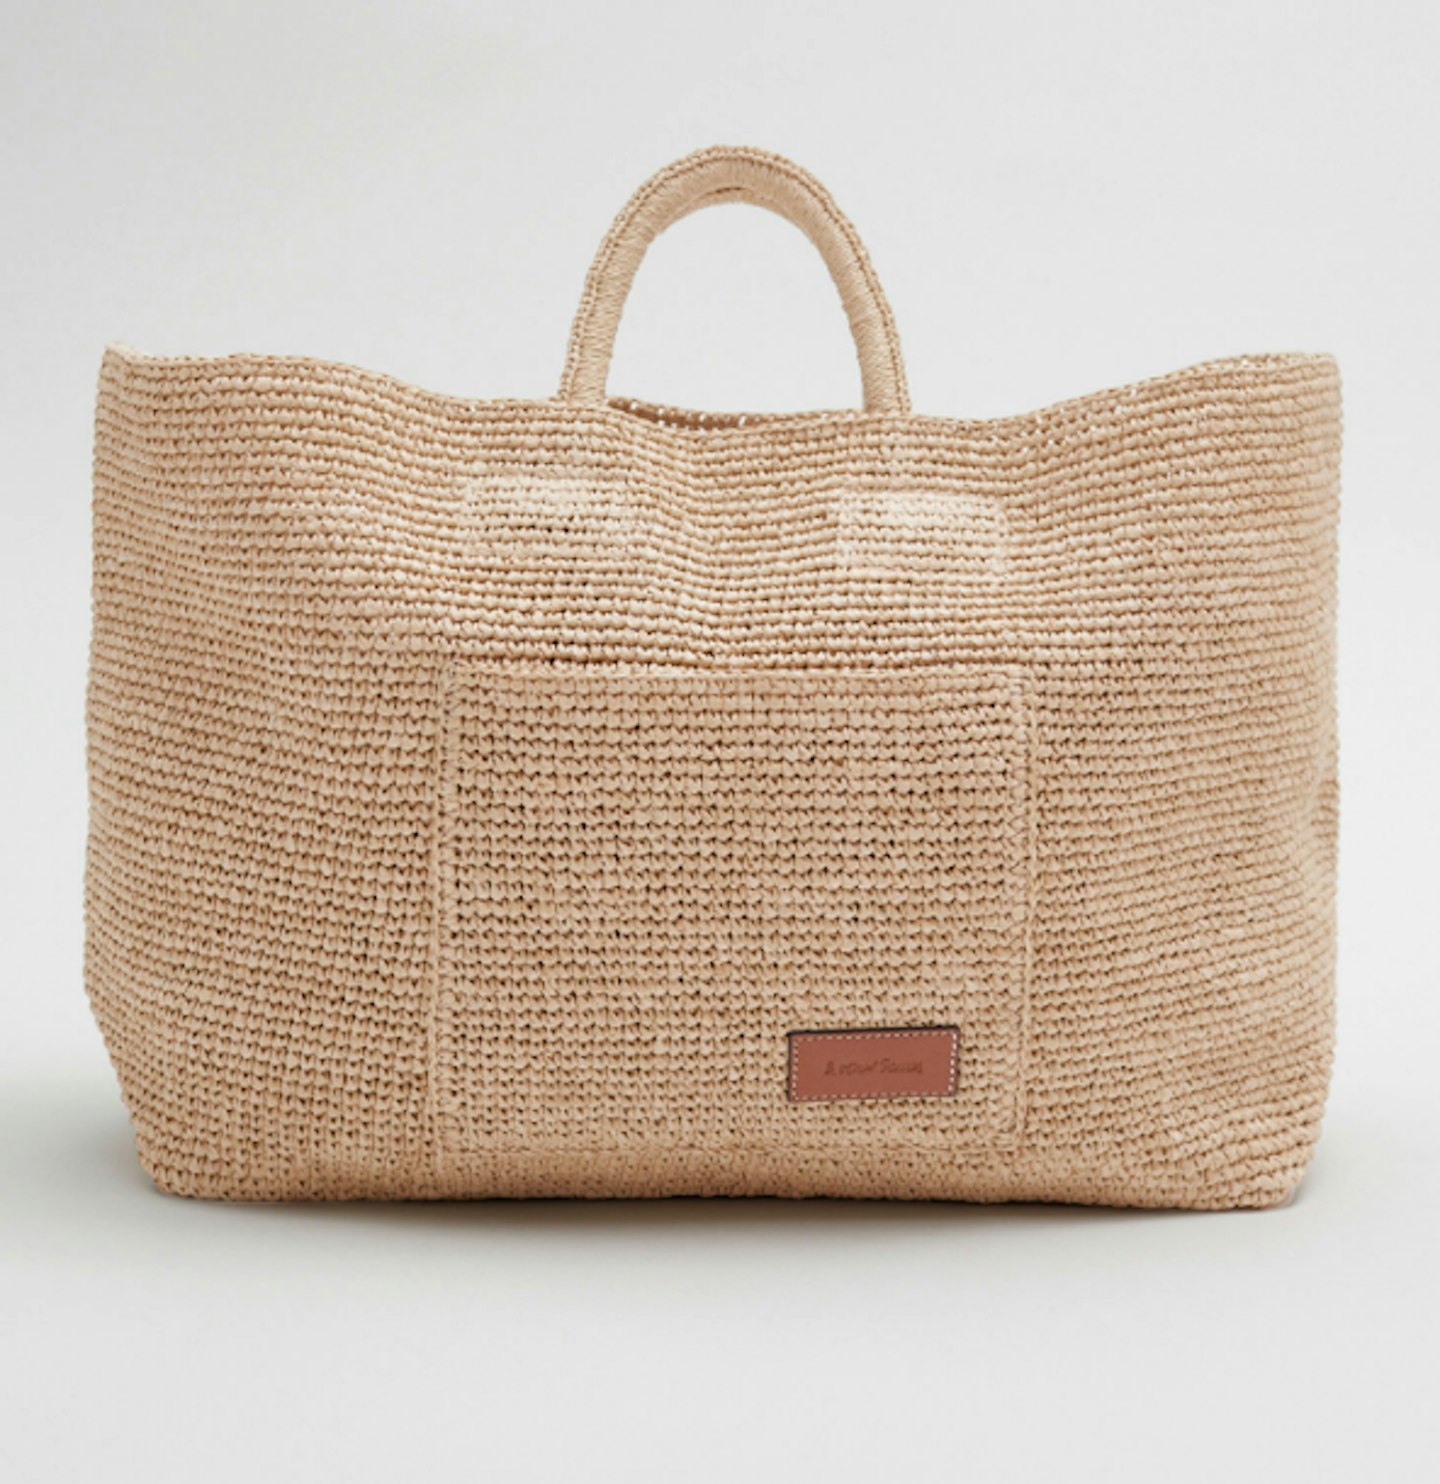 & Other Stories, Large Woven Straw Tote